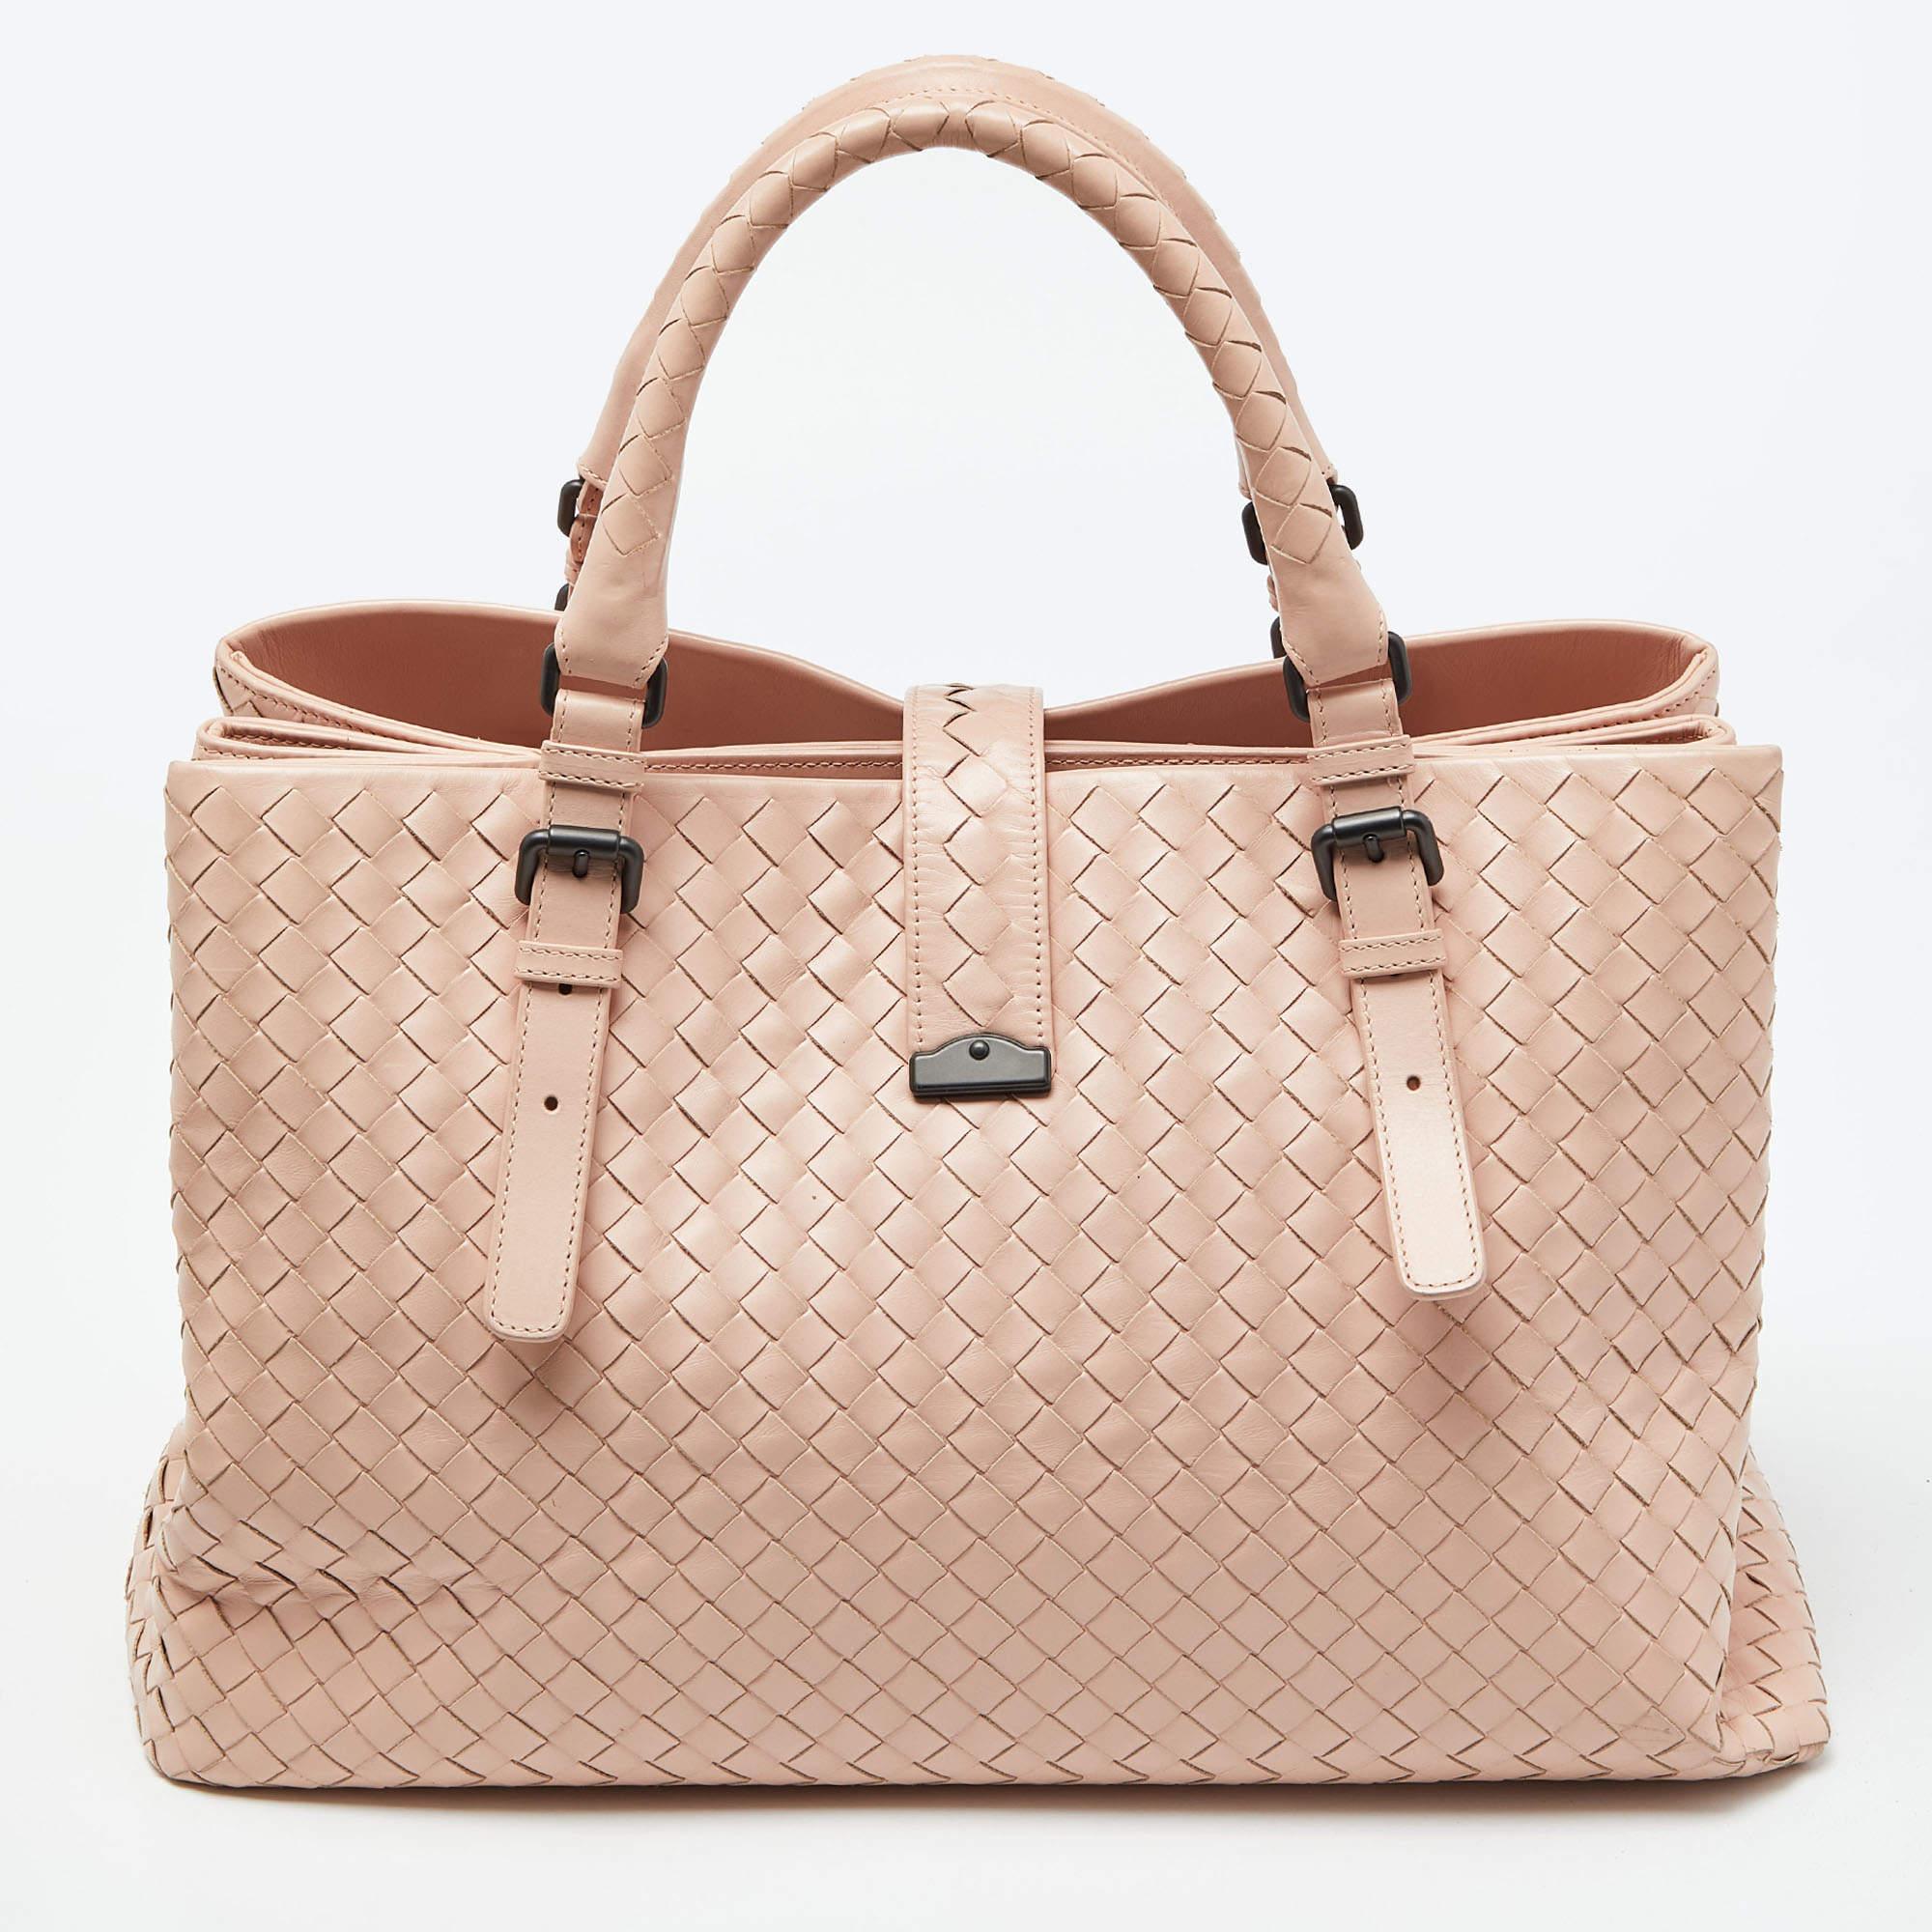 This Bottega Veneta tote is a creation that brings joy to one's sight! It has been beautifully crafted from leather in the signature Intrecciato motif with two handles on top. The bag is also equipped with a flap push-lock which secures Alcantara